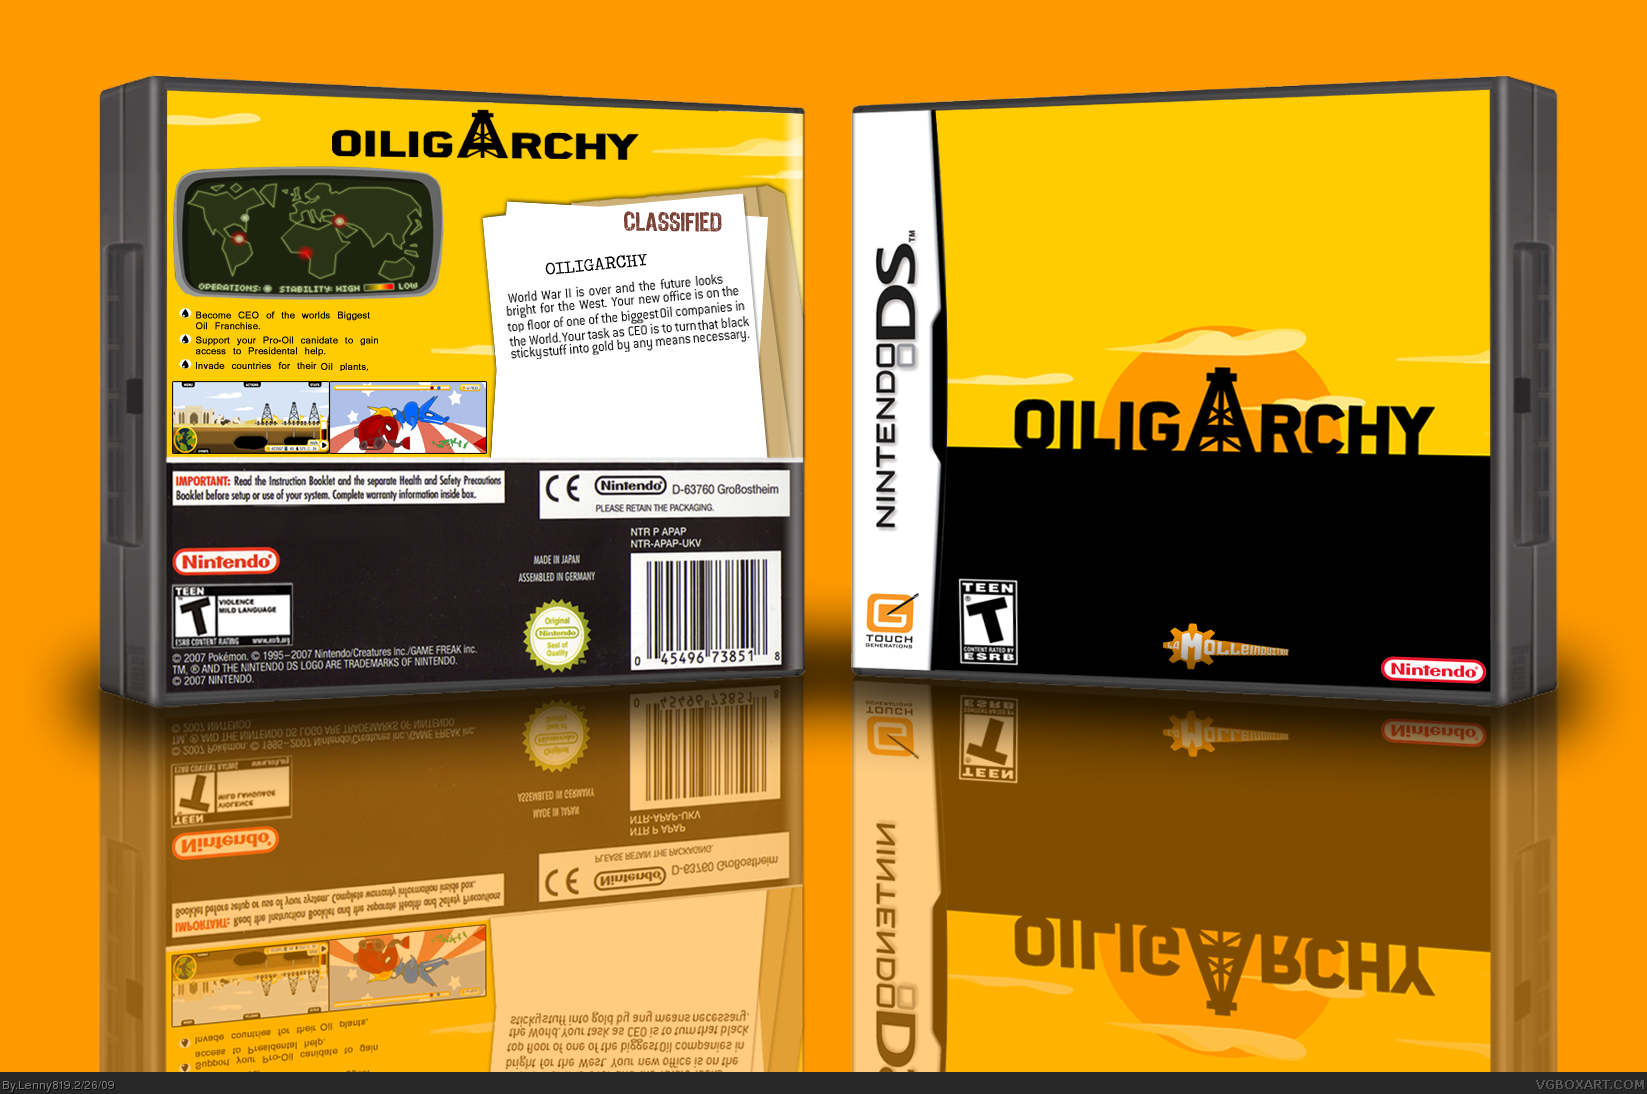 Oiligarchy box cover